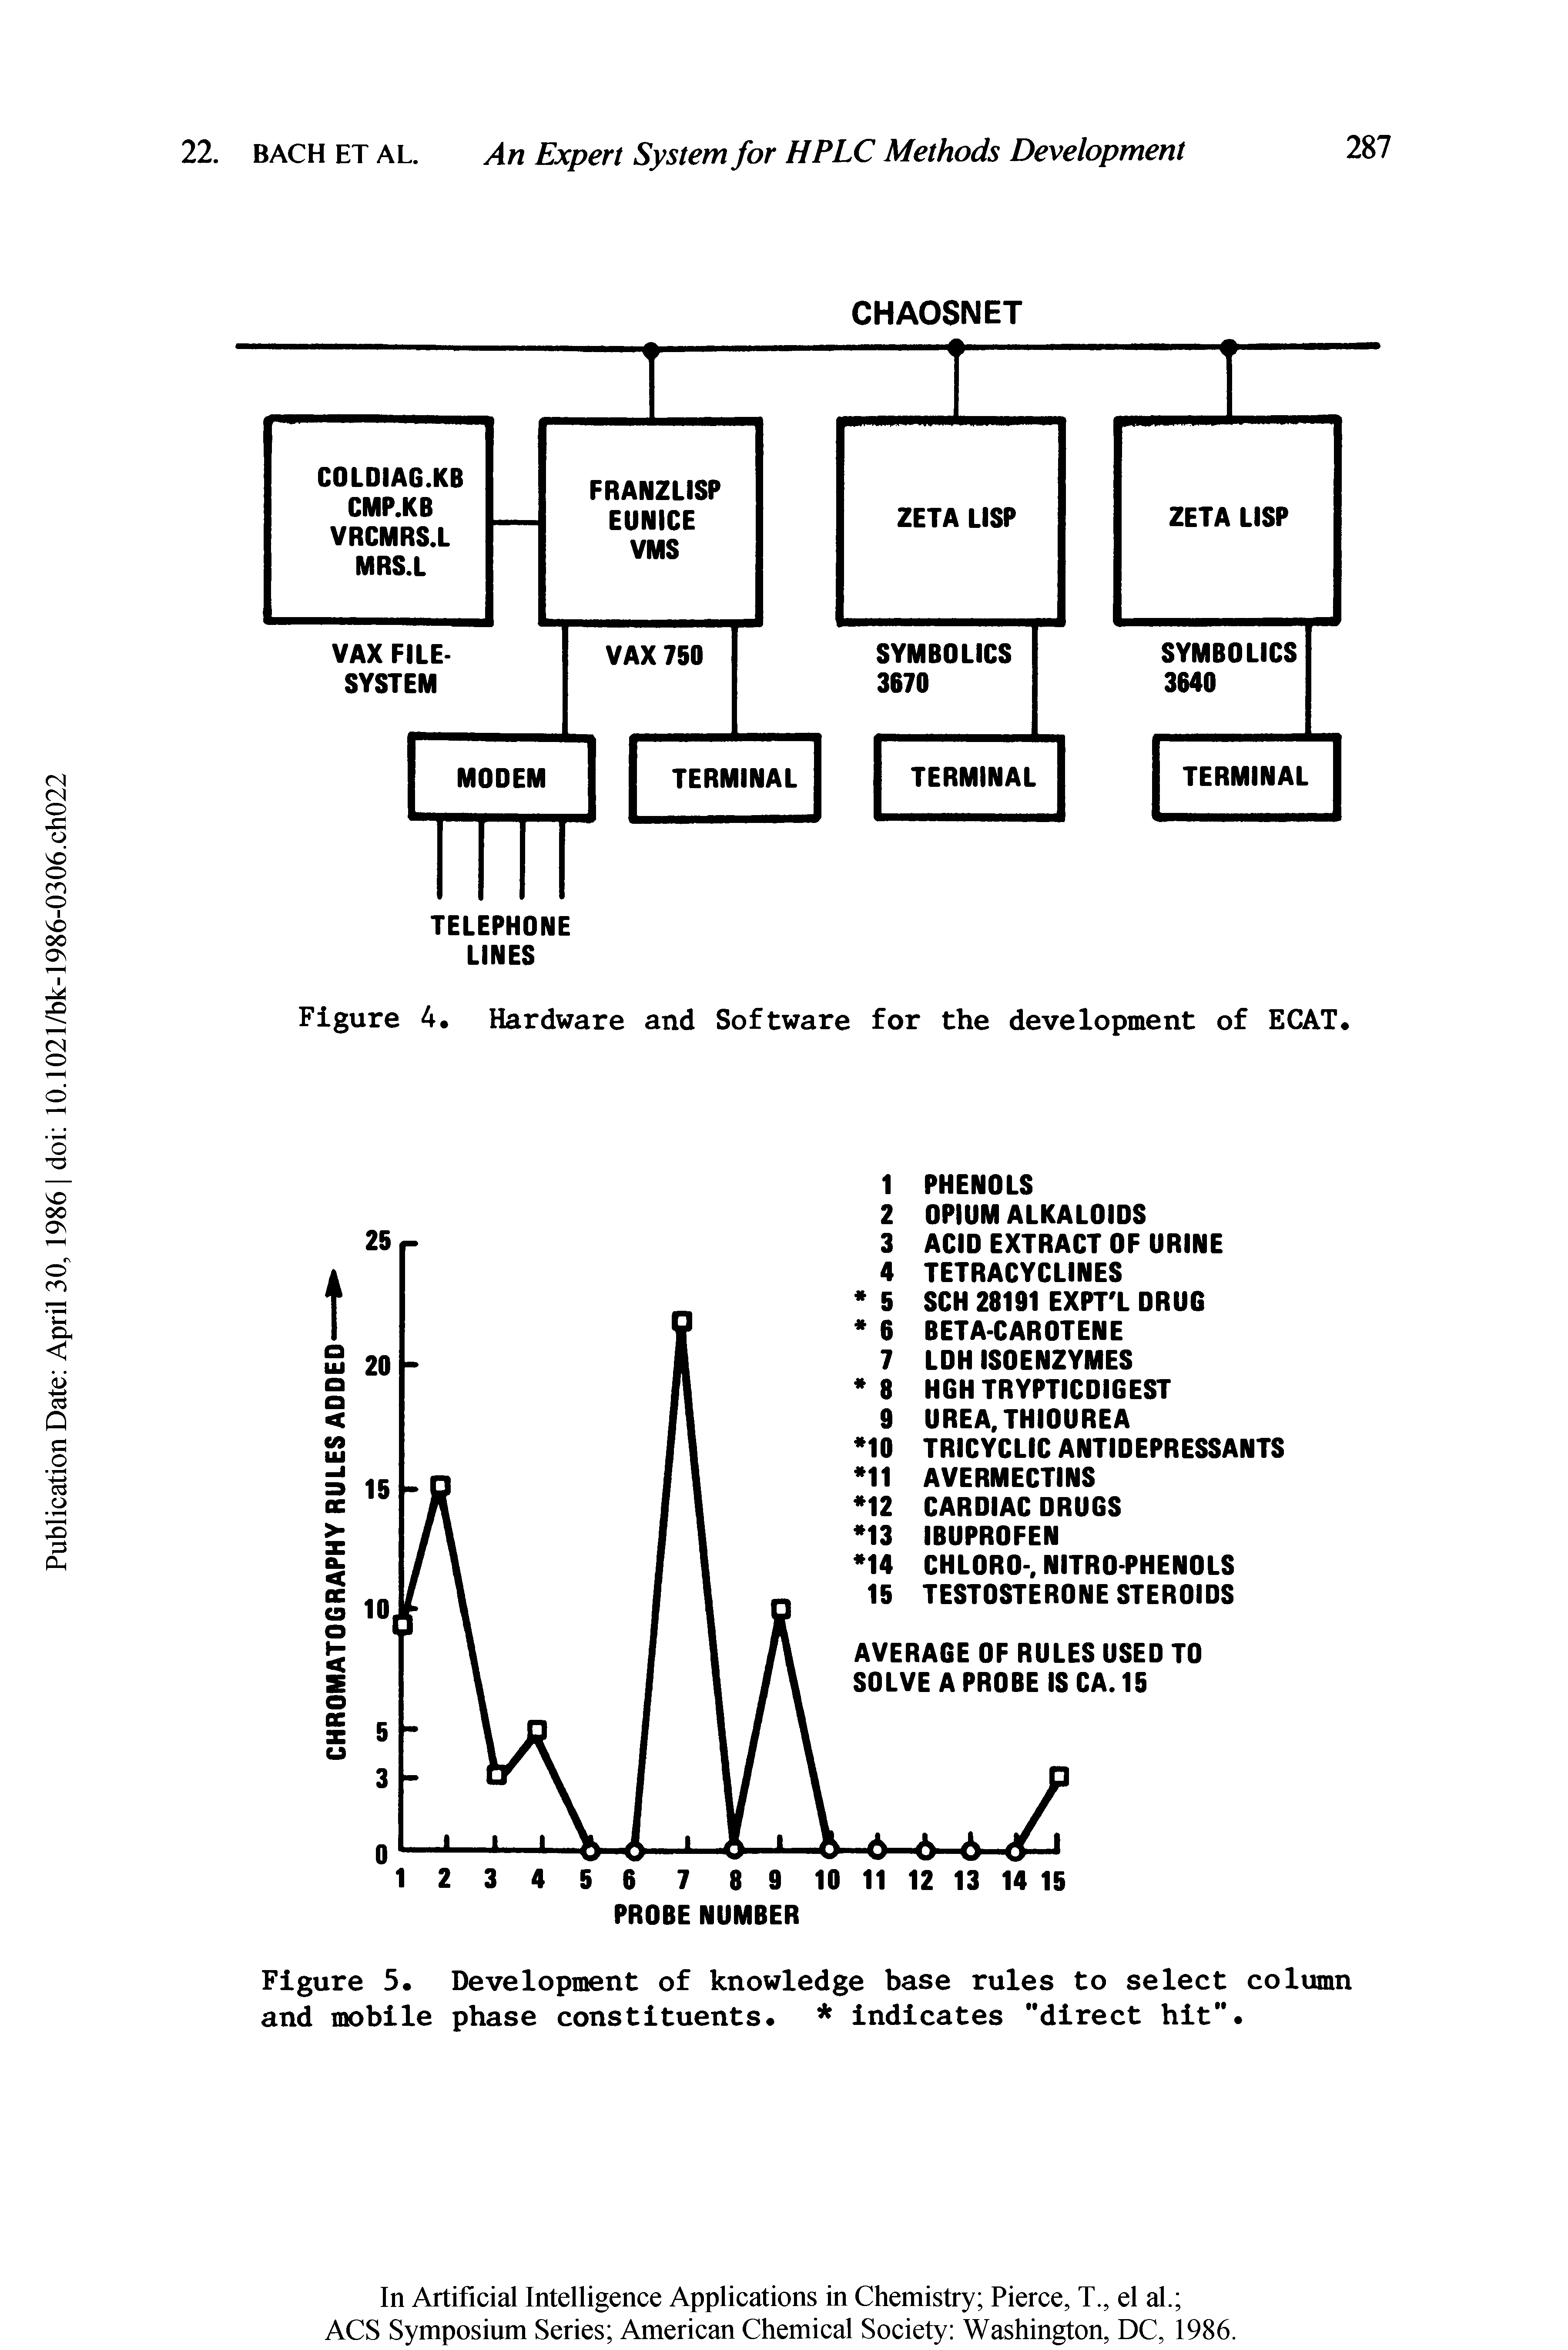 Figure 5. Development of knowledge base rules to select column and mobile phase constituents. indicates "direct hit".